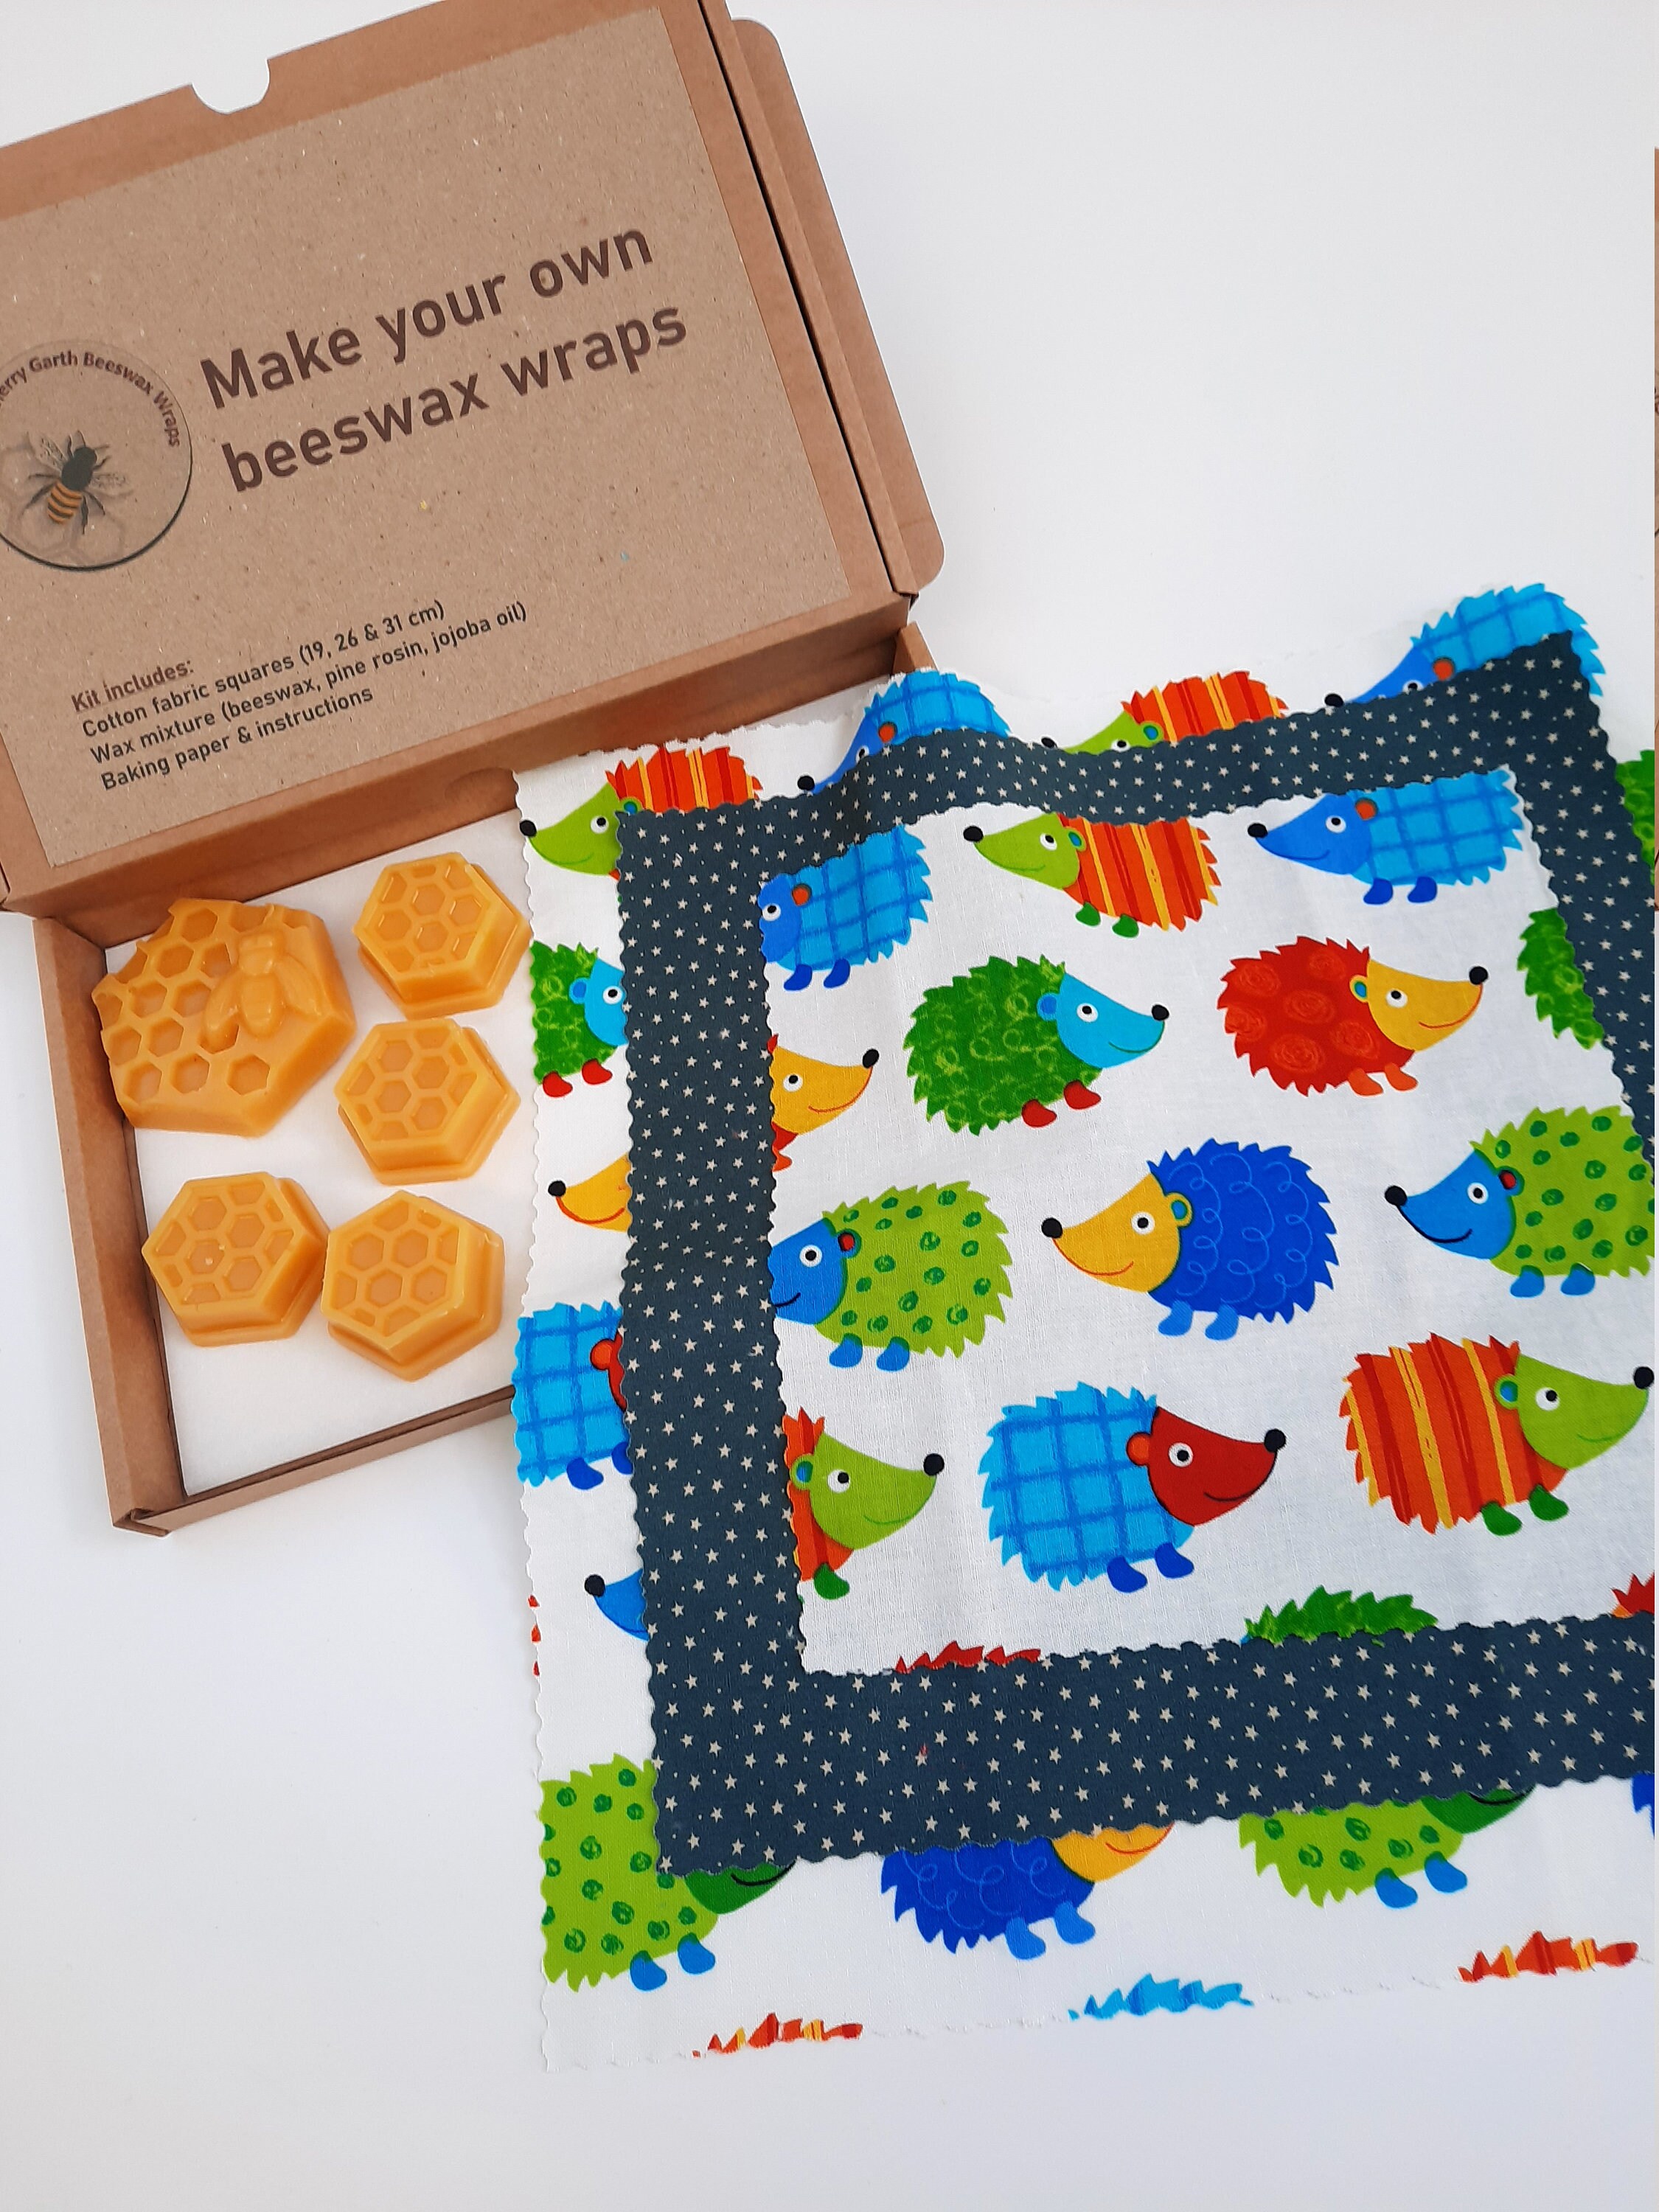 DIY beeswax wrap kit make your own set of 4 beeswax wraps | Etsy